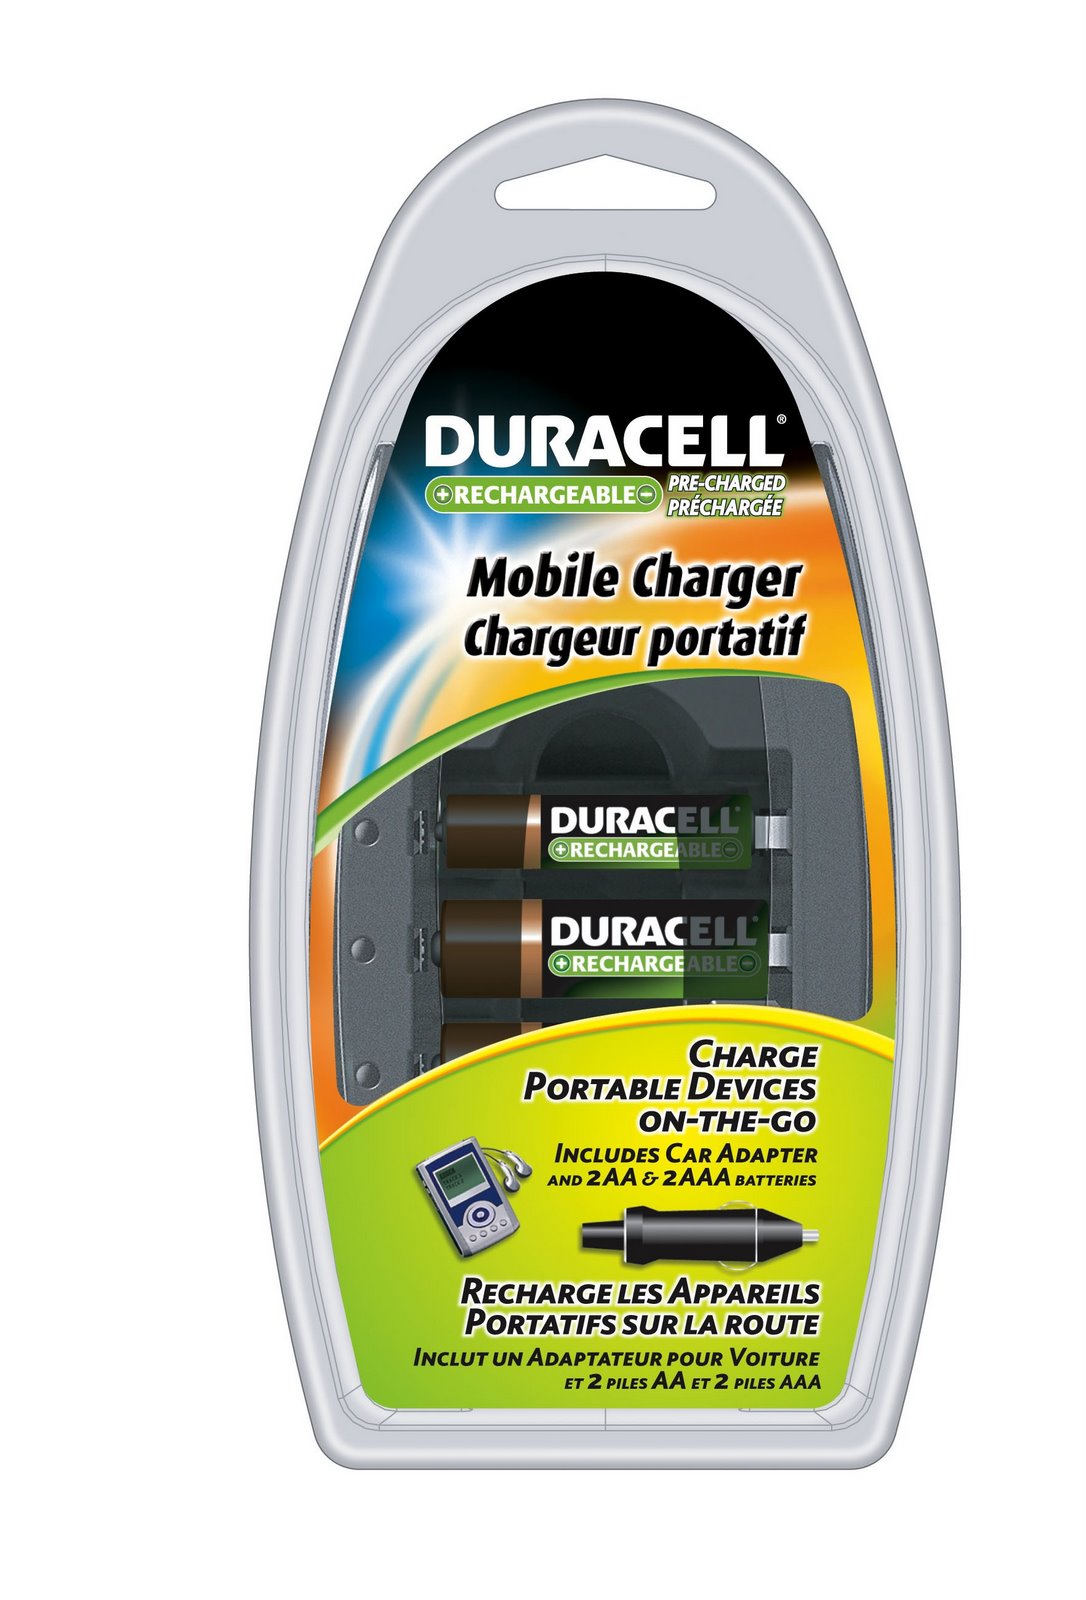 [Duracell+Mobile+Charger-1.jpg]